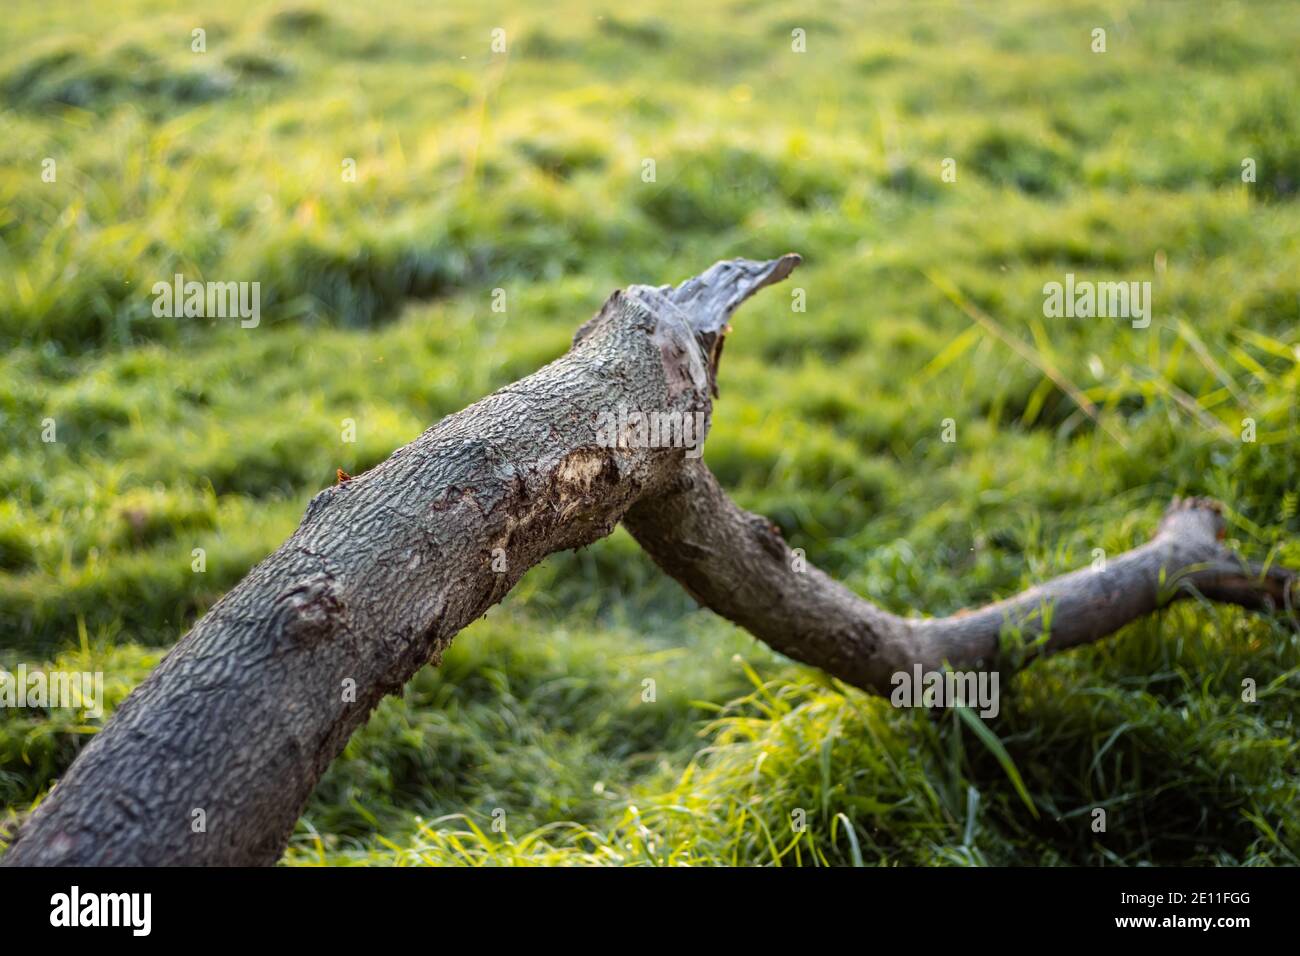 A laying lebbeck tree branch on the green grasses Stock Photo